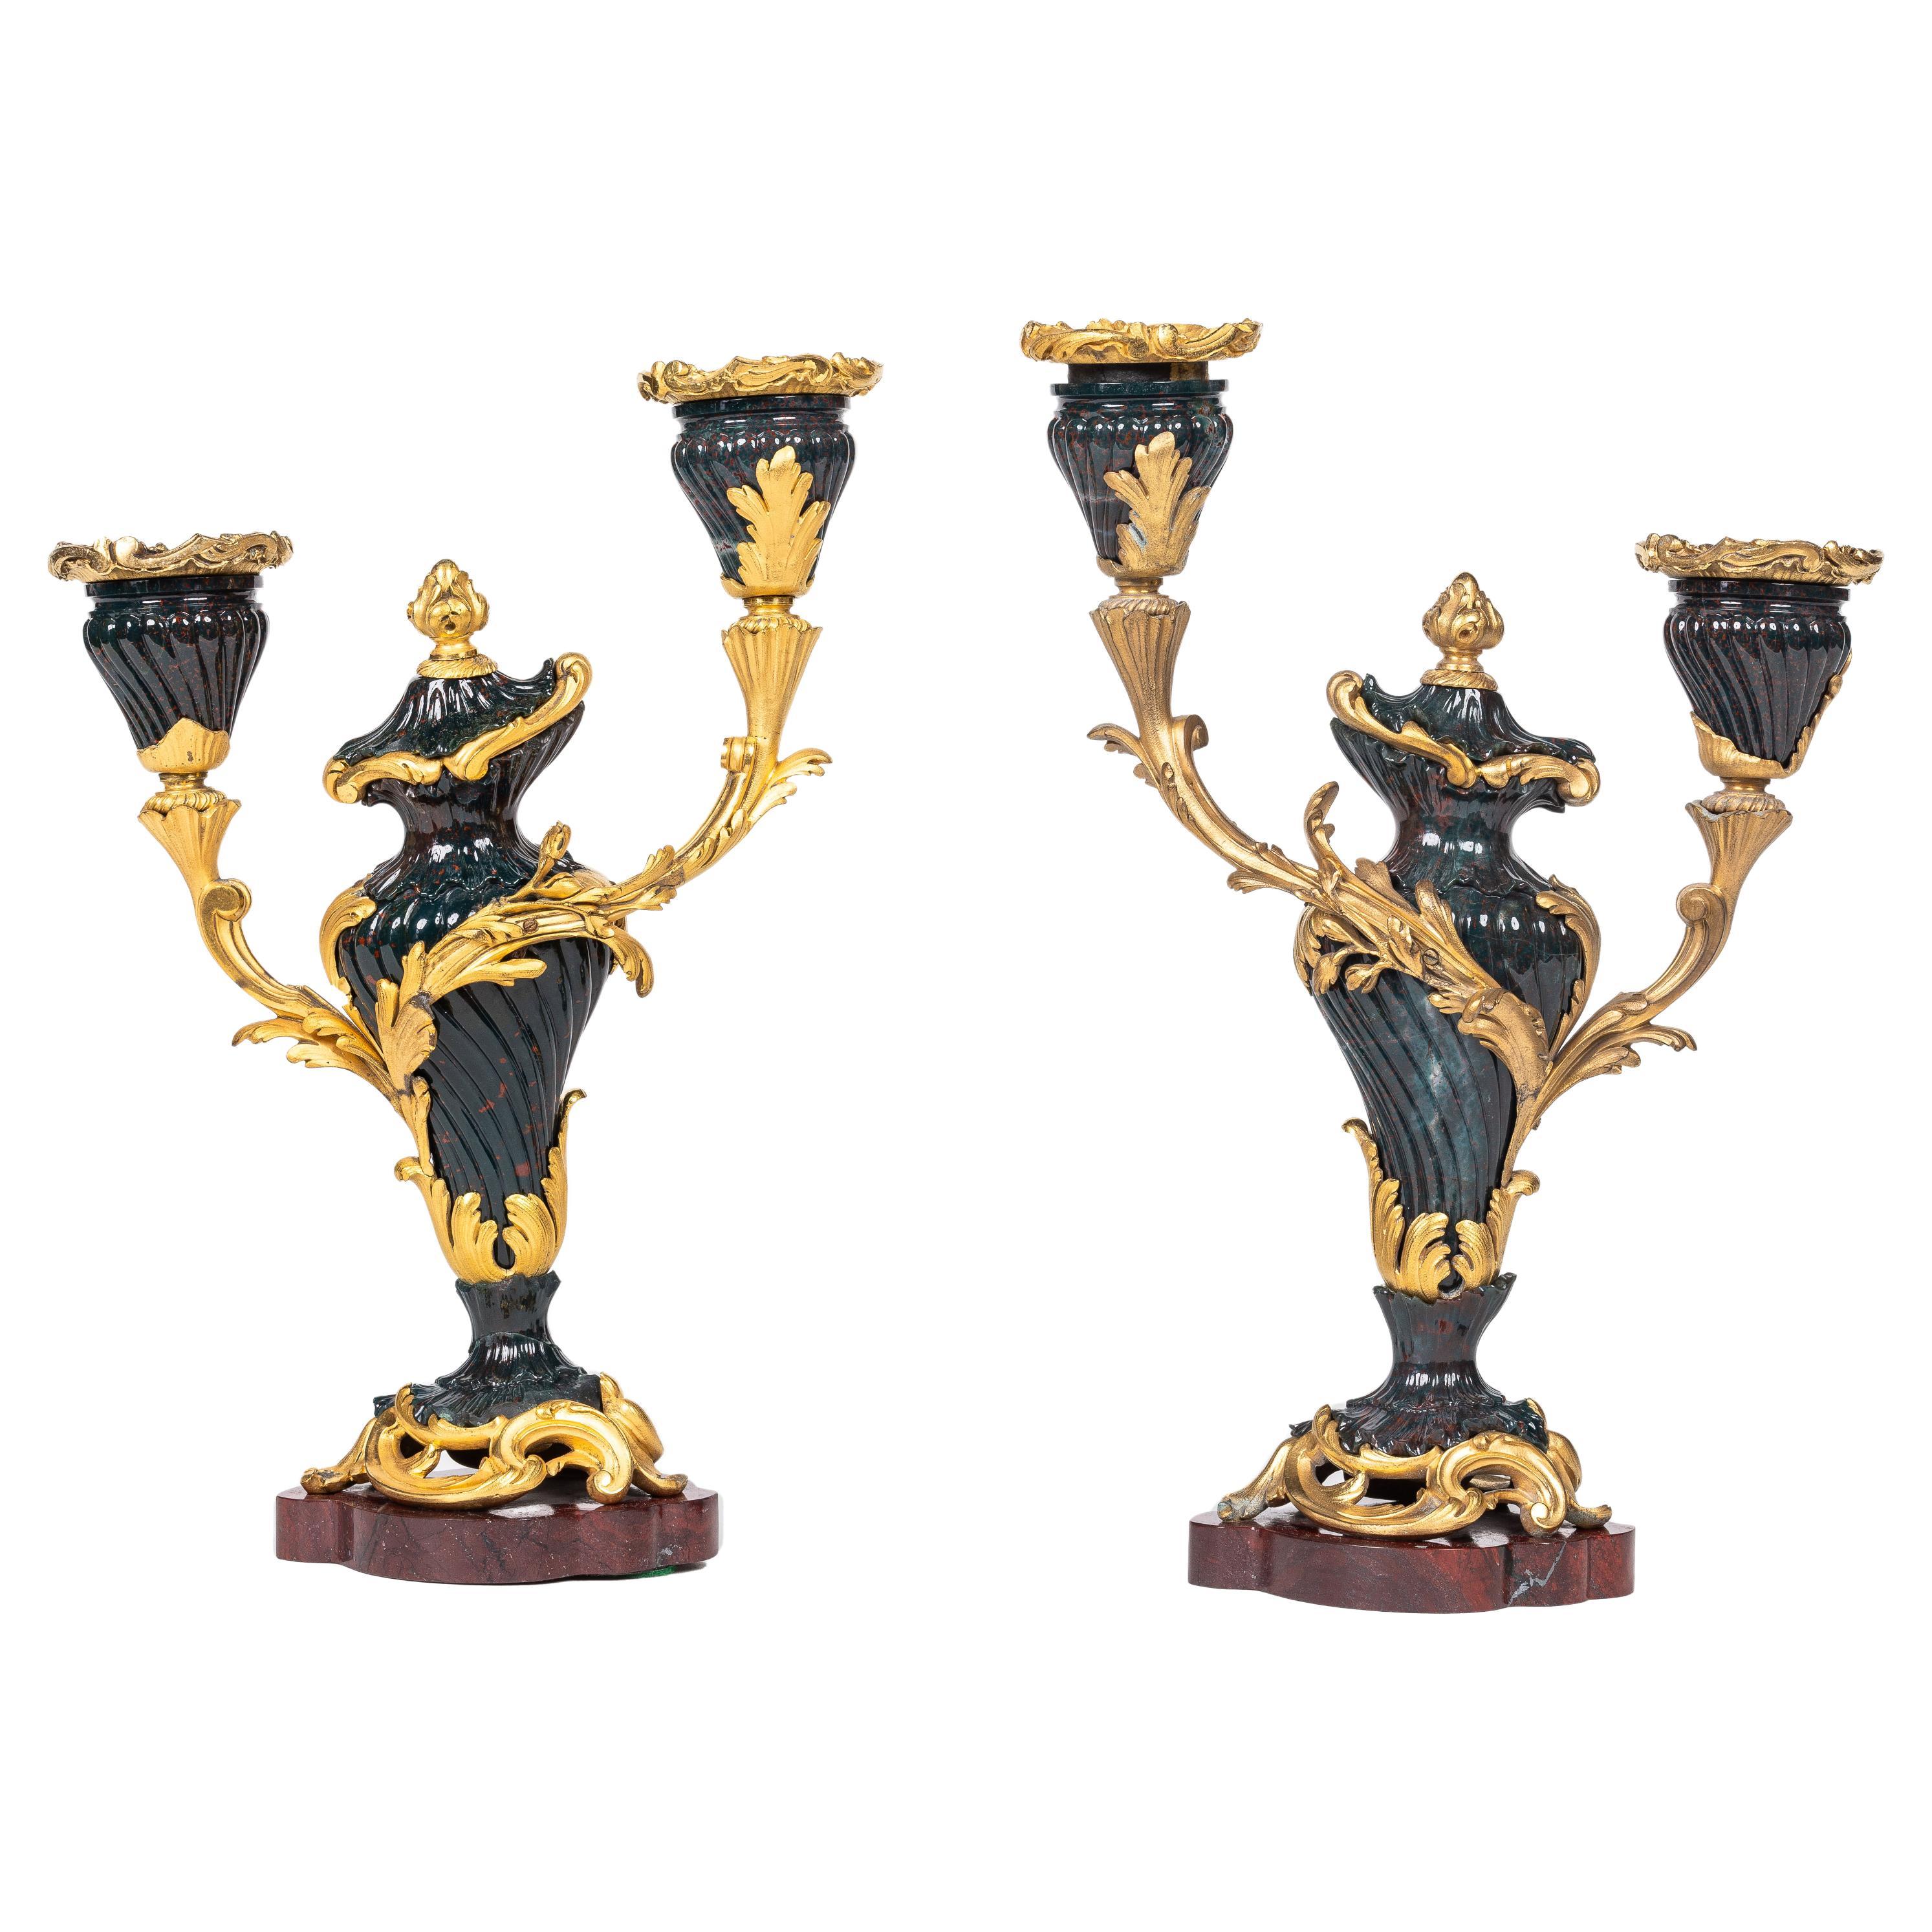 A Rare and Exquisite Pair of Ormolu-Mounted Bloodstone Two-Light Candlesticks For Sale